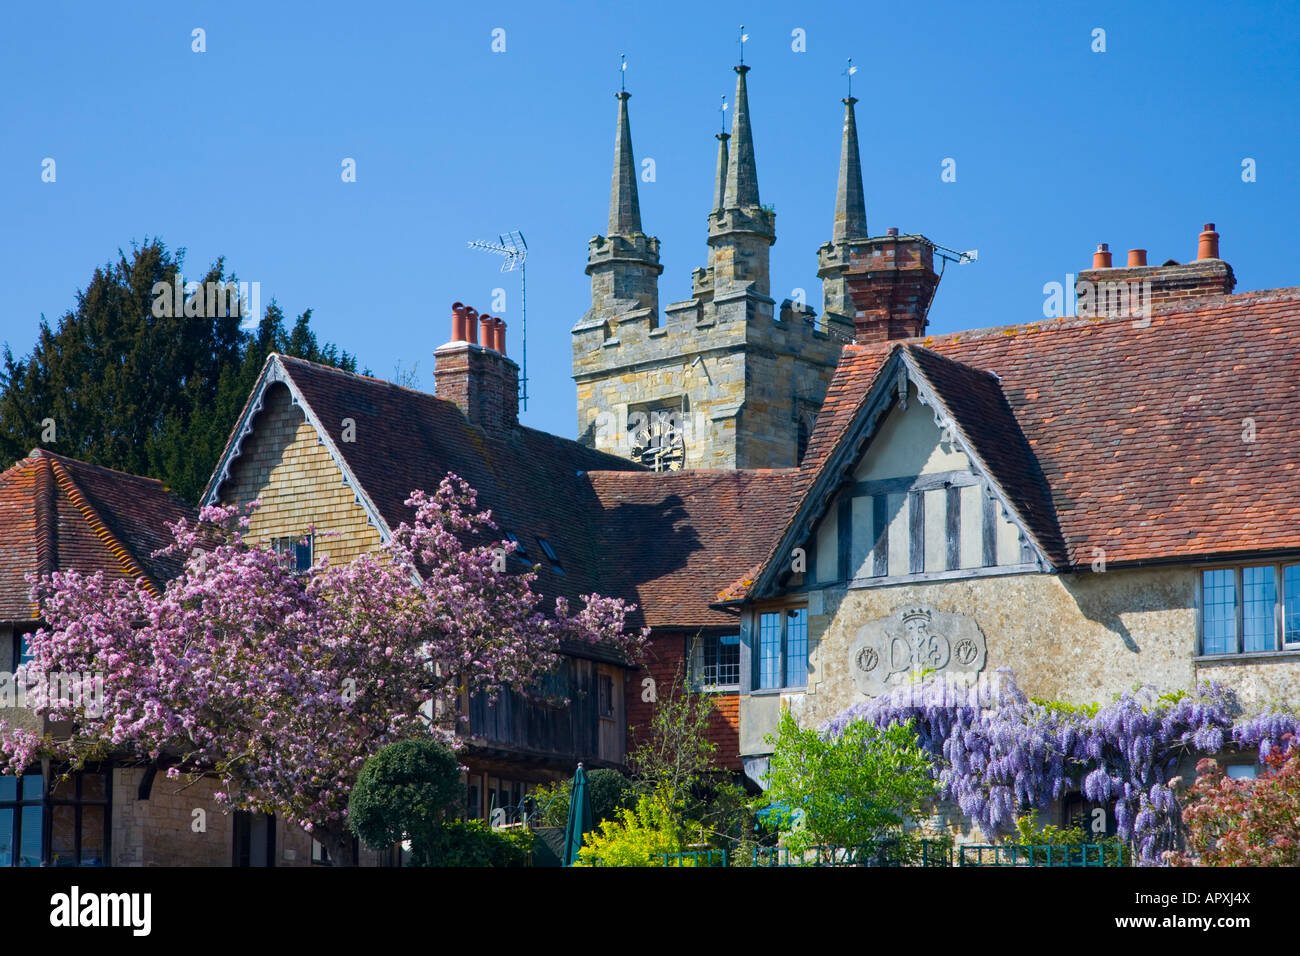 Penshurst, Kent, England. Tower of the Church of St John the Baptist and medieval timbered houses. Stock Photo